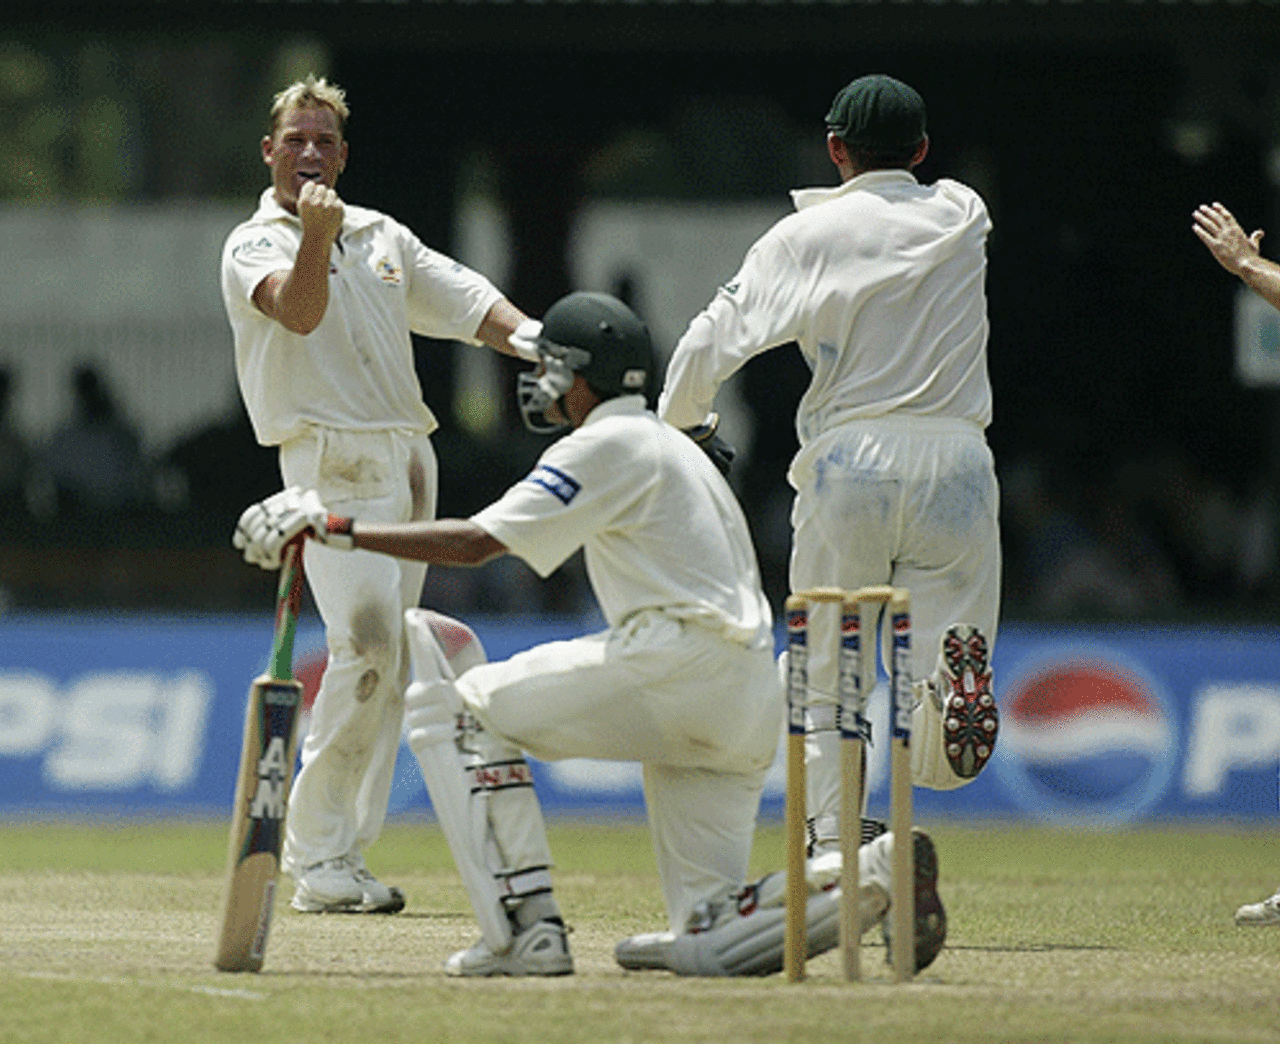 COLOMBO - OCTOBER 7: Shane Warne of Australia celebrates dismissing Younis Khan of Pakistan during the fifth day of the first test match between Pakistan and Australia at the P.Saravanamuttu Stadium in Colombo, Sri Lanka on October 7, 2002.